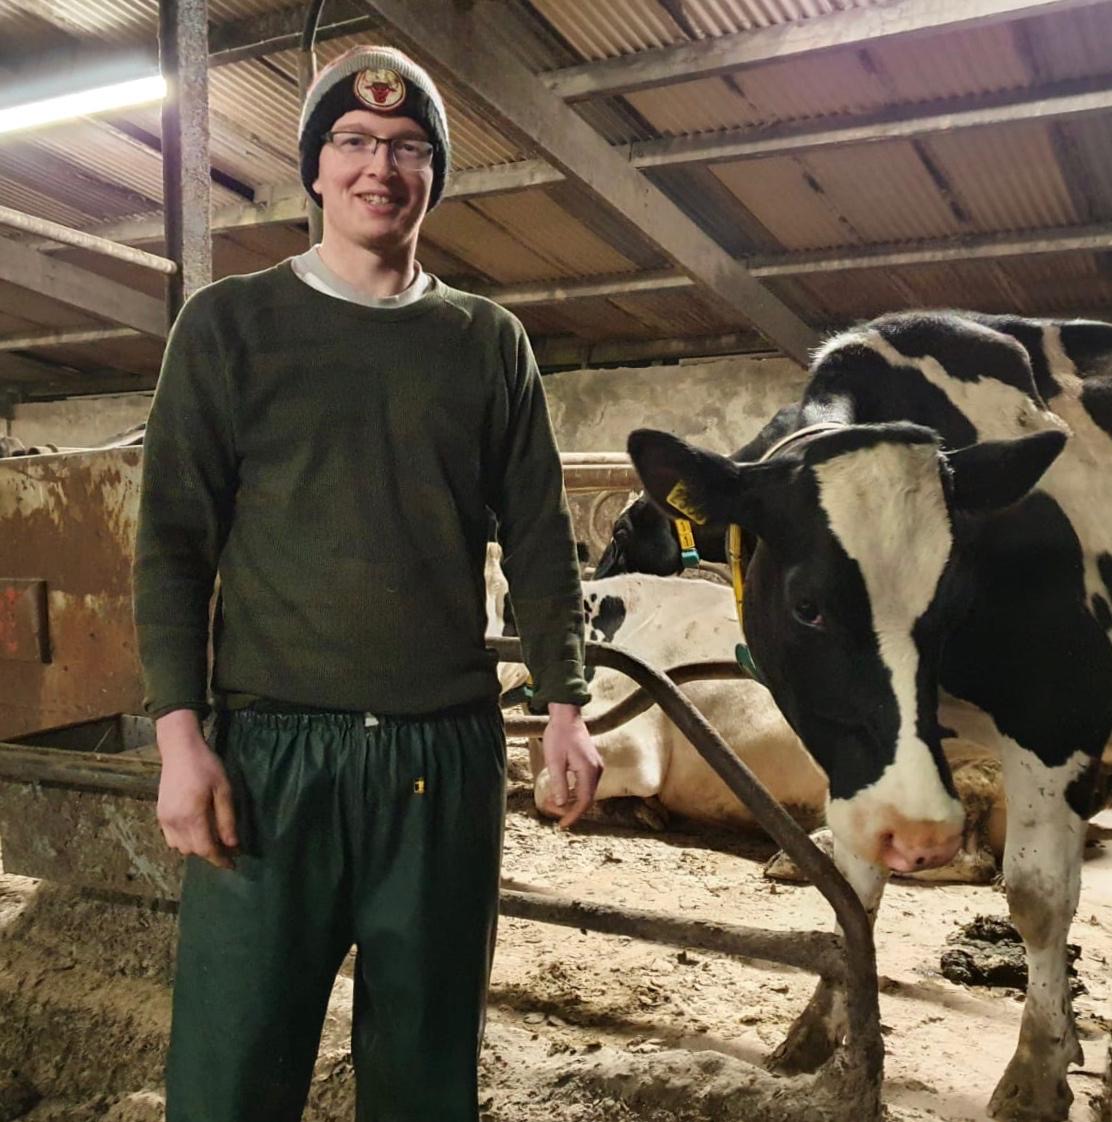 Gearoid Murphy standing with cows in barn